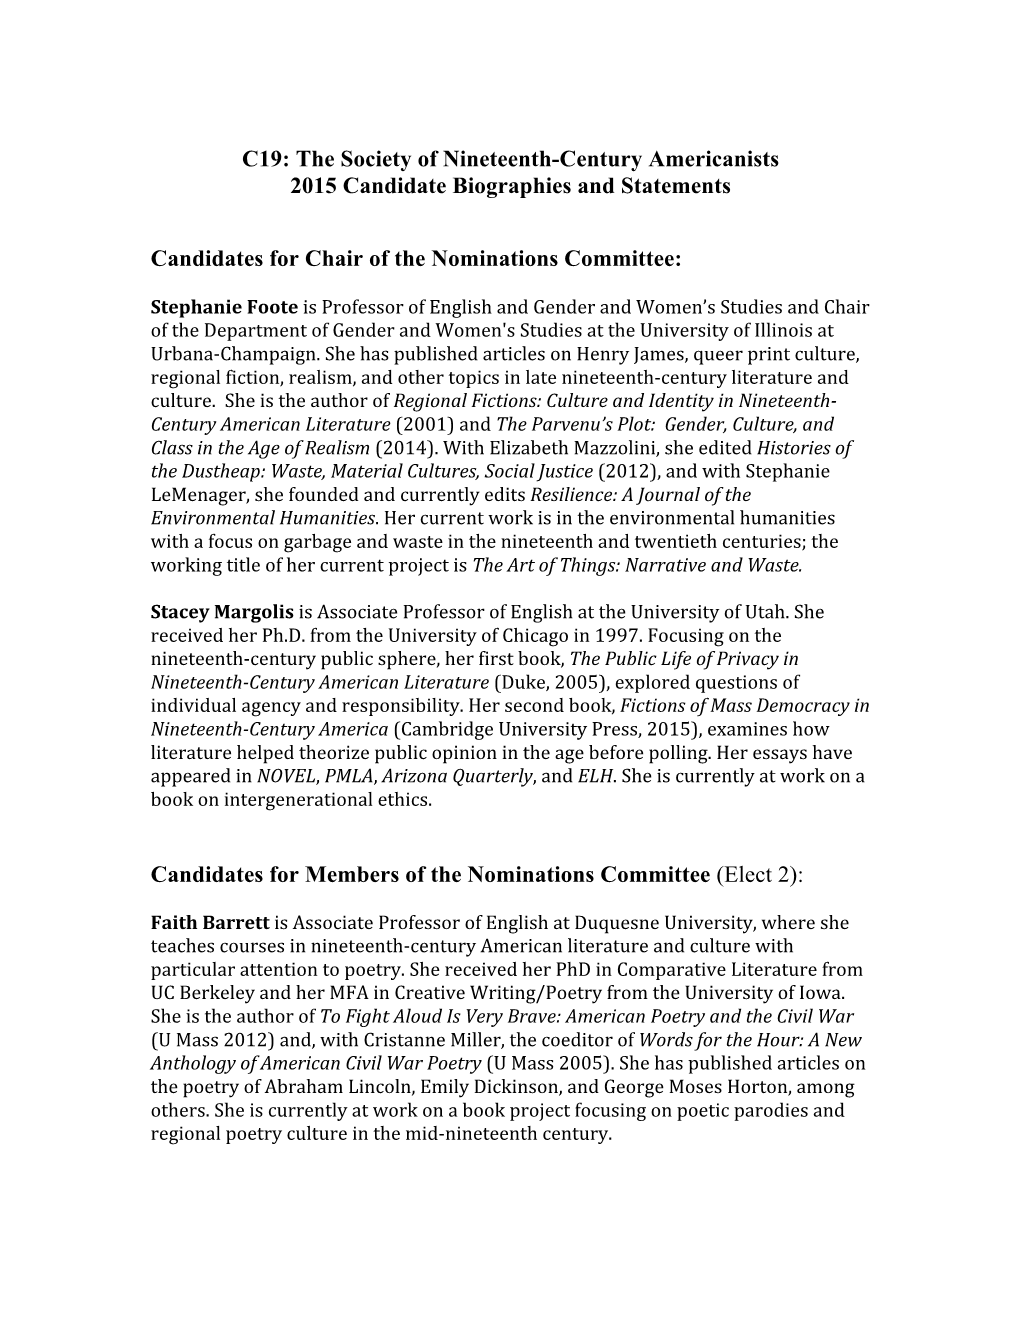 C19: the Society of Nineteenth-Century Americanists 2015 Candidate Biographies and Statements